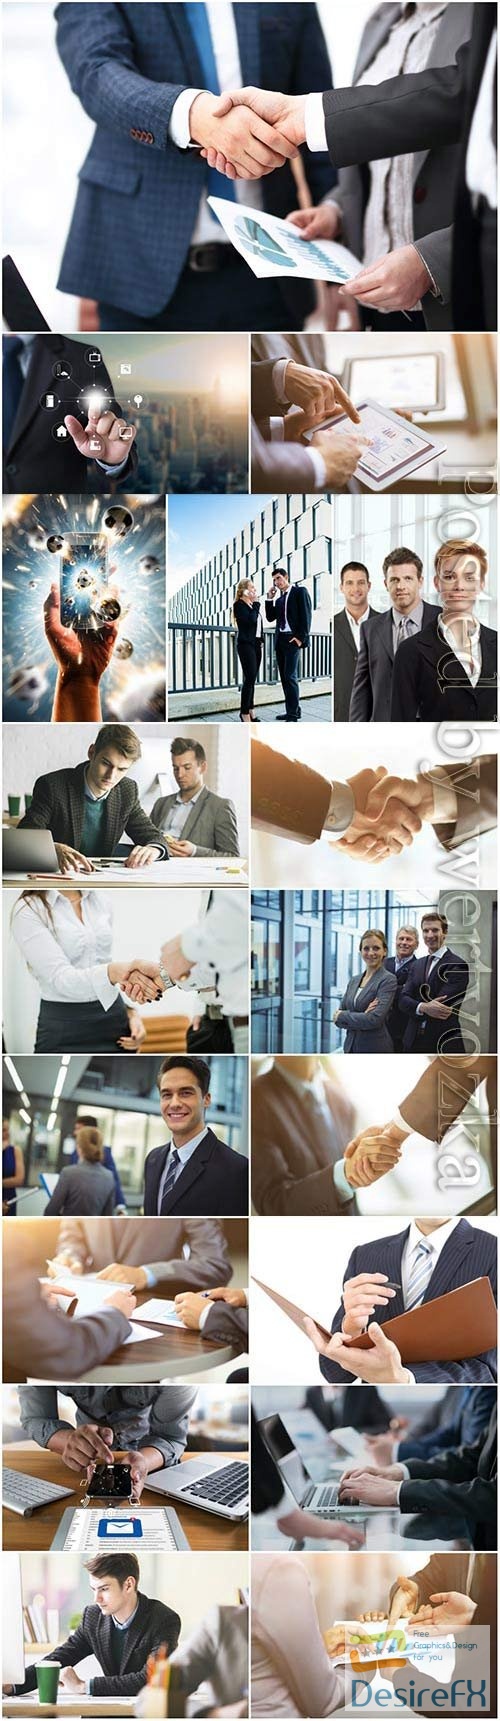 Business concept, business people stock photo